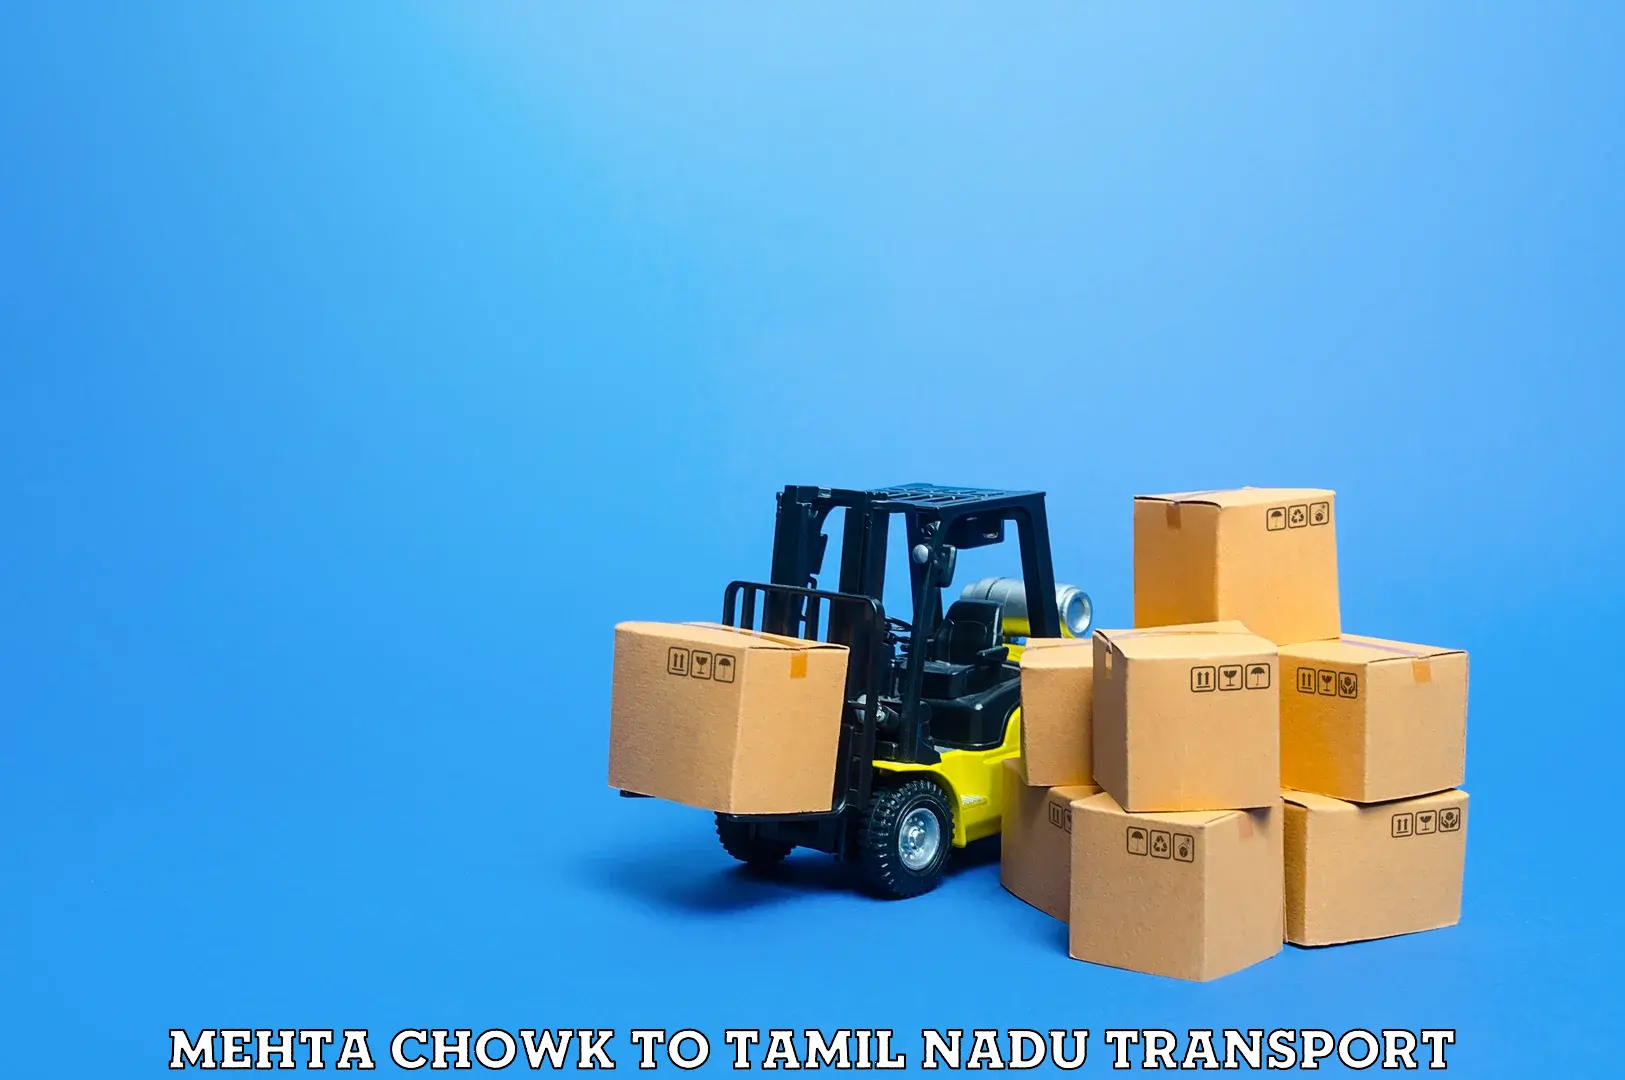 Shipping services Mehta Chowk to The Gandhigram Rural Institute